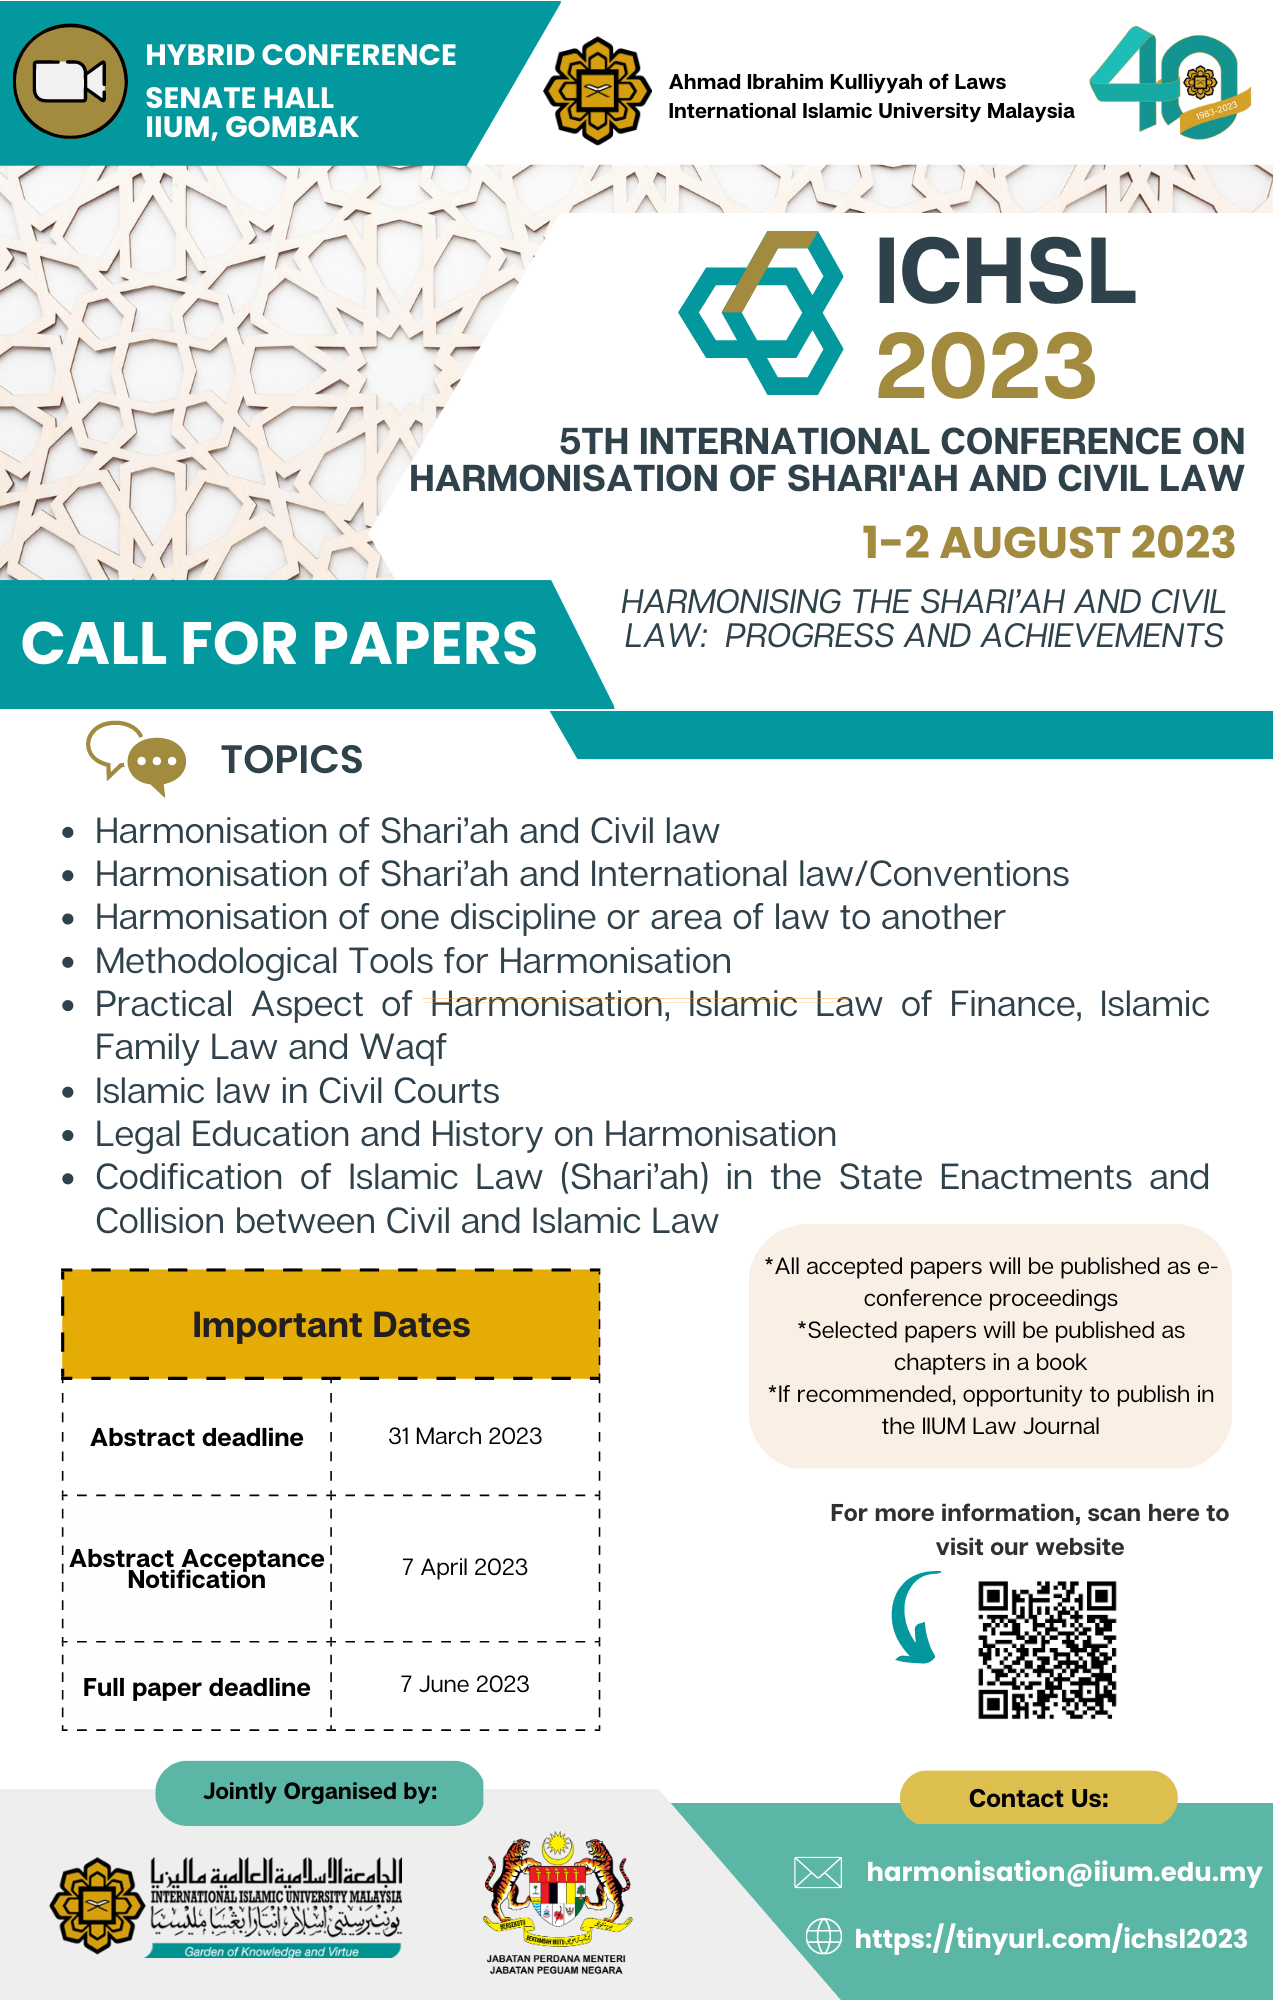 THE 5TH INTERNATIONAL CONFERENCE ON HARMONISATION OF SHARI’AH AND CIVIL LAW 2023 (ICHSL 2023)